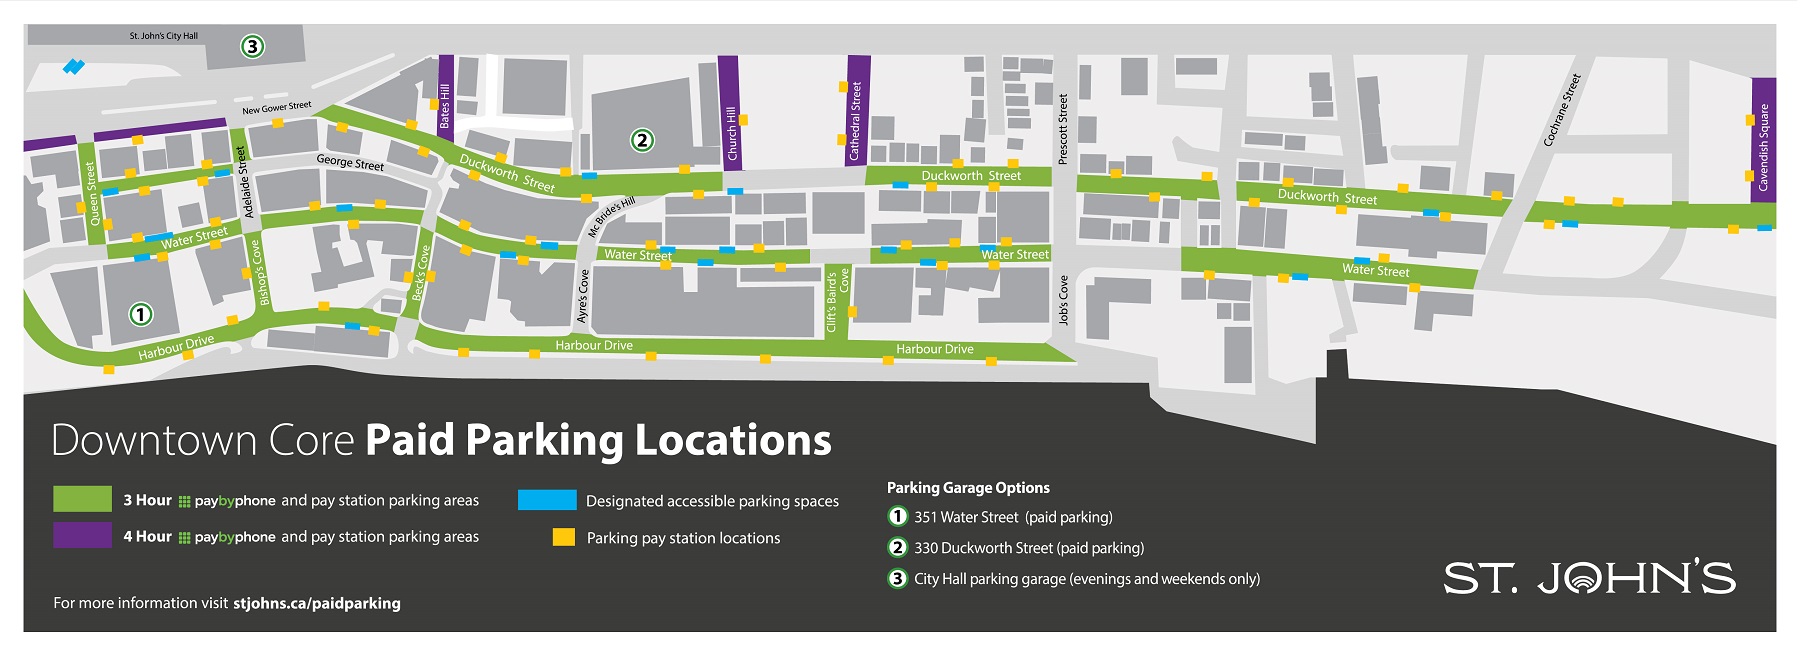 A map of downtown paid parking areas in St. John's